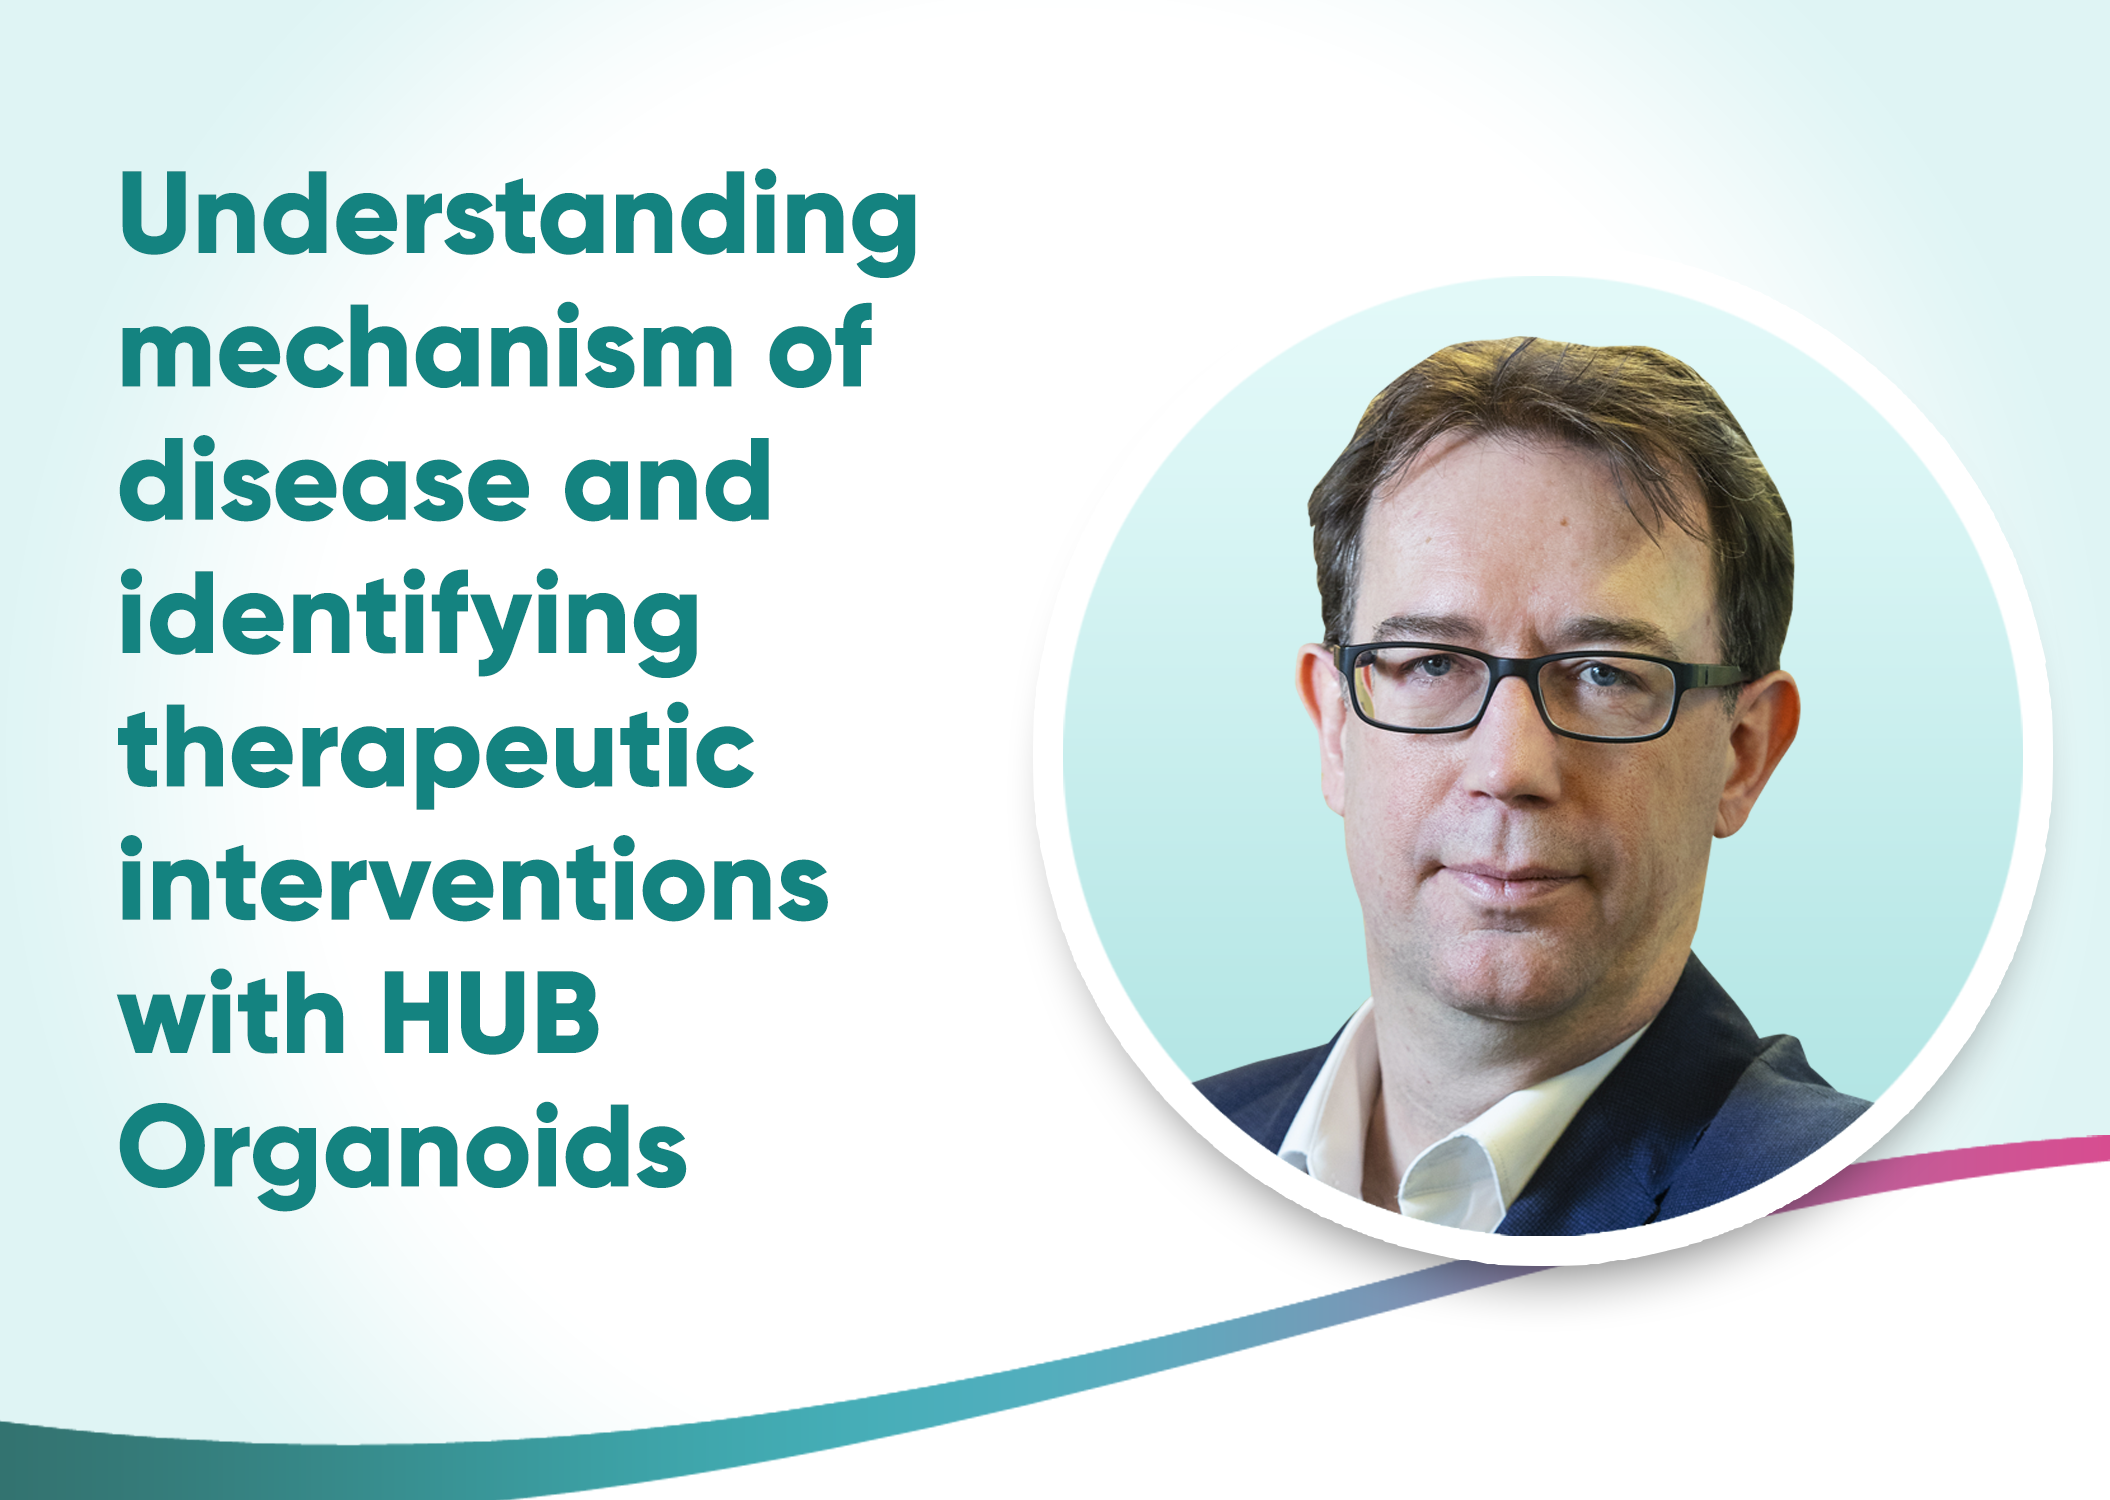 Understanding mechanism of disease and identifying therapeutic interventions with HUB Organoids